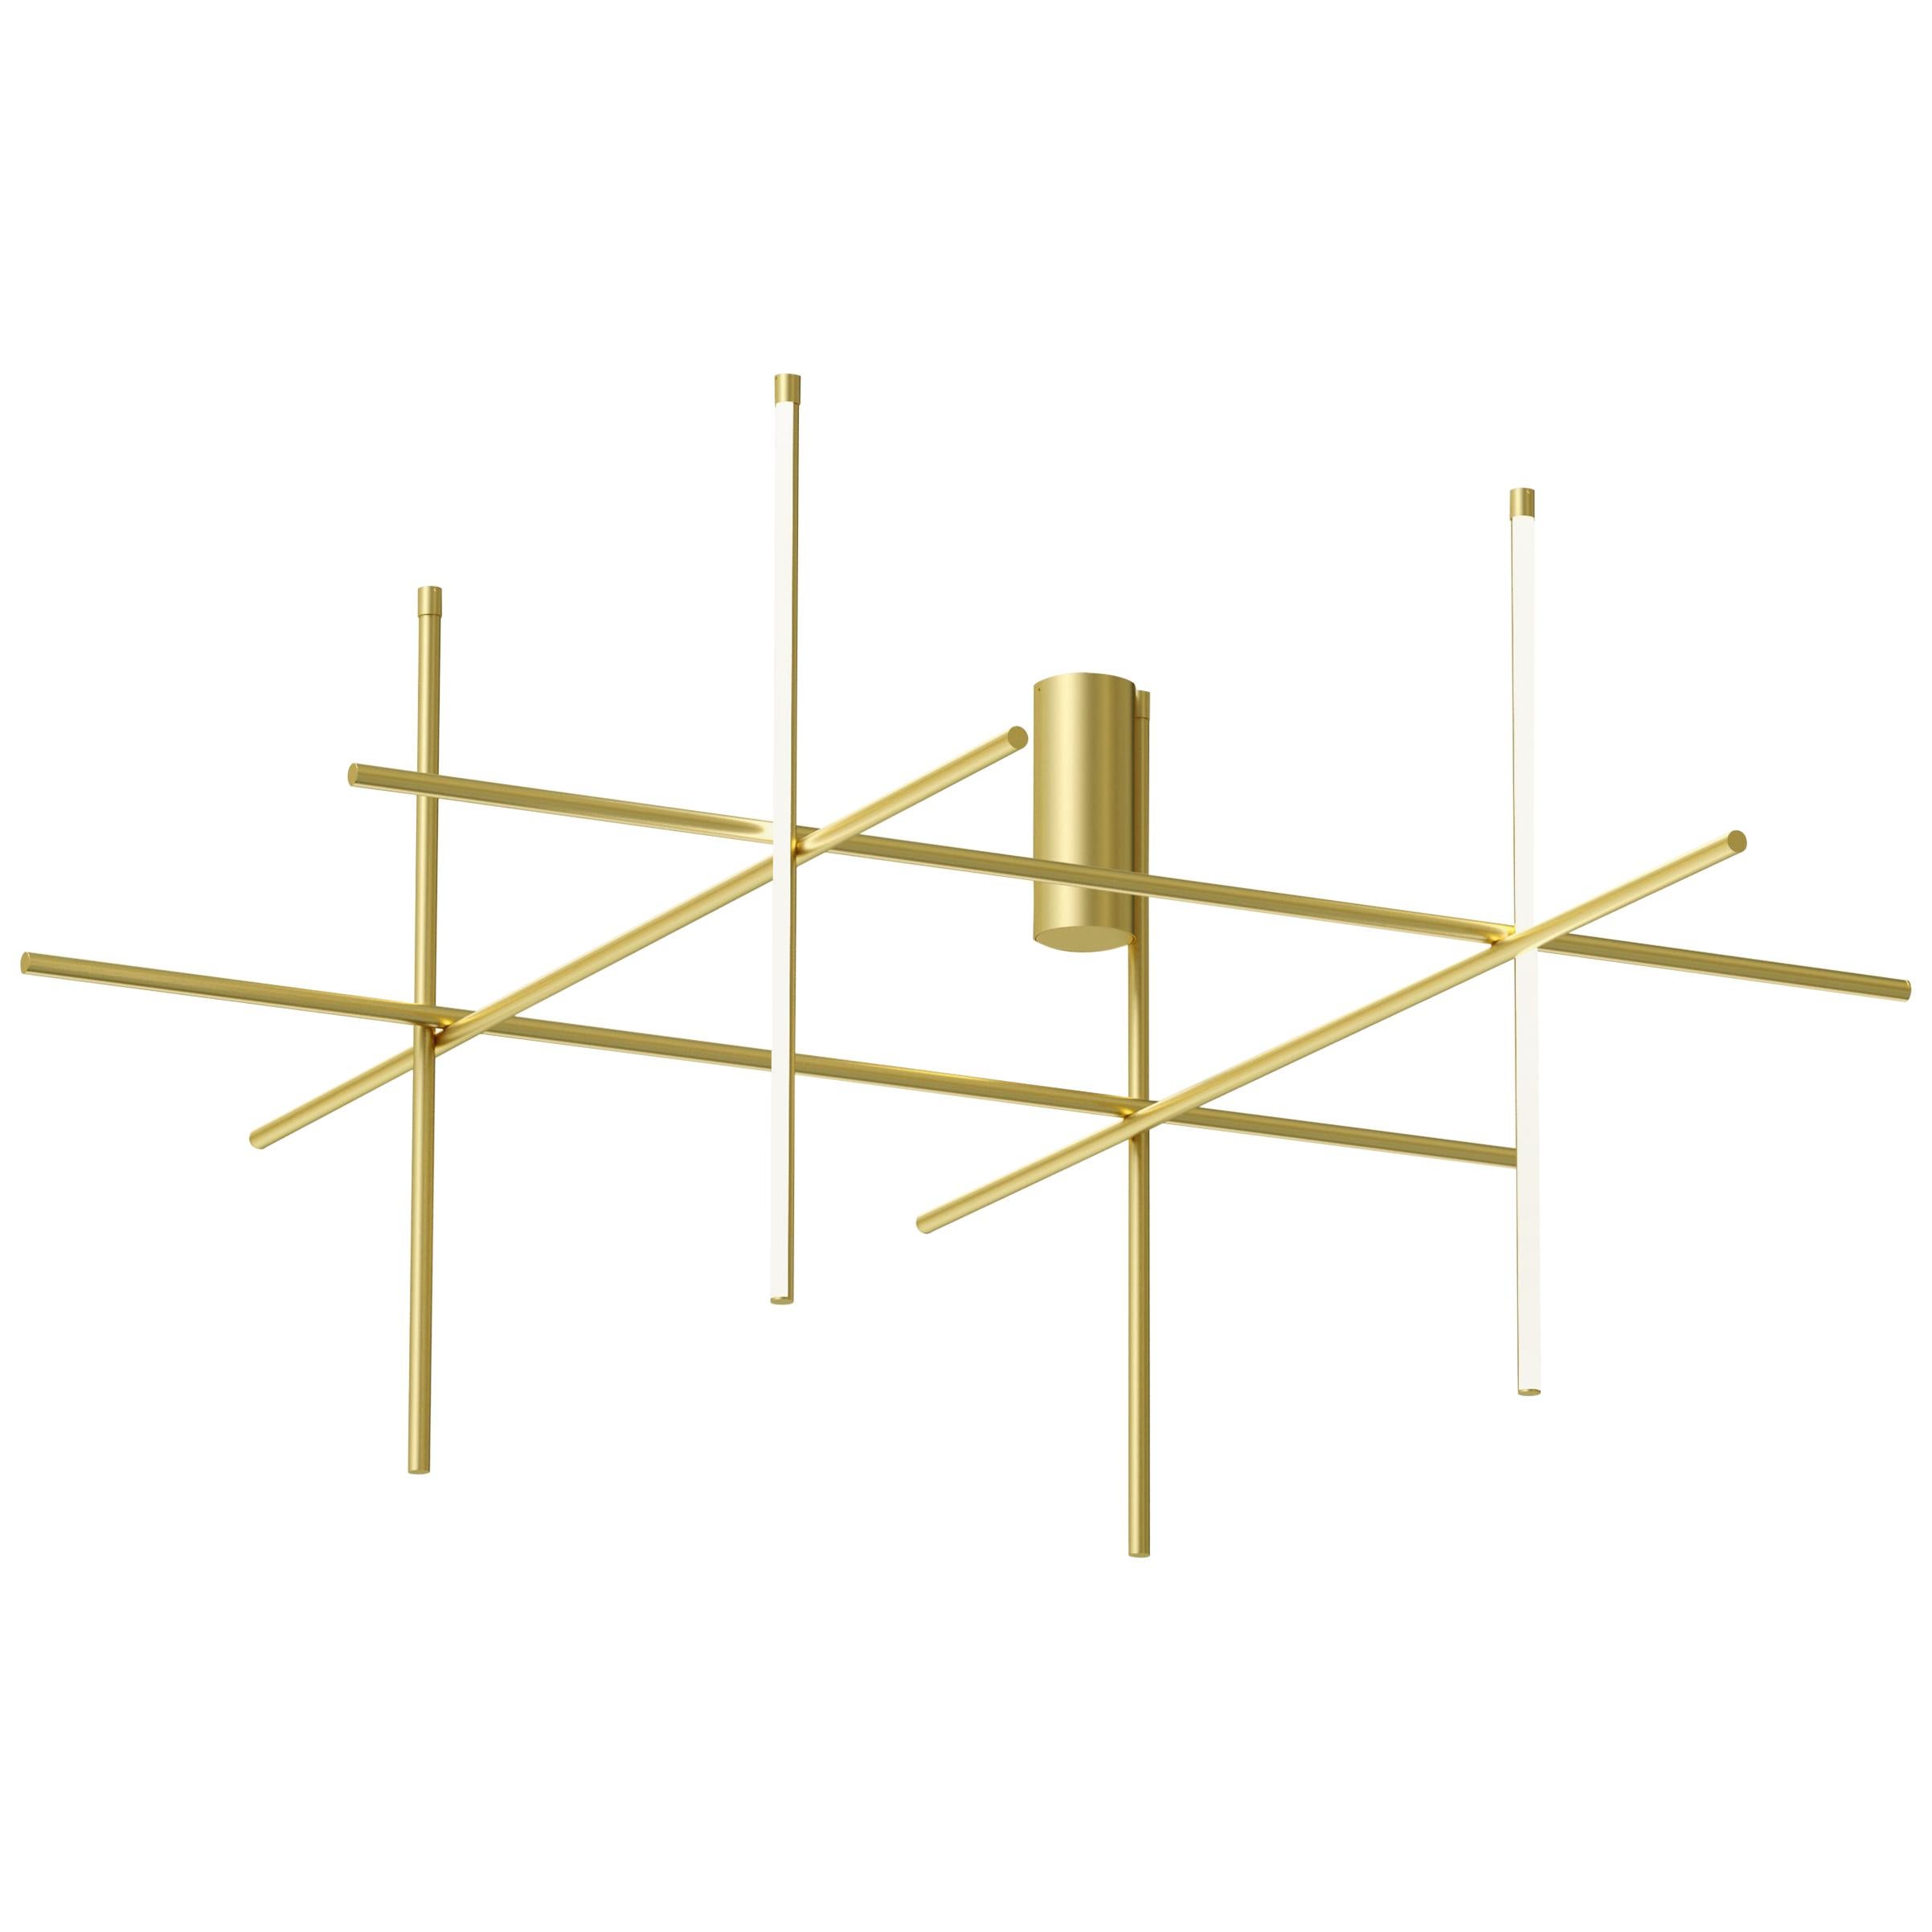 Flos Coordinates Ceiling 4 Light in Anodized Champagne by Michael Anastassiades For Sale